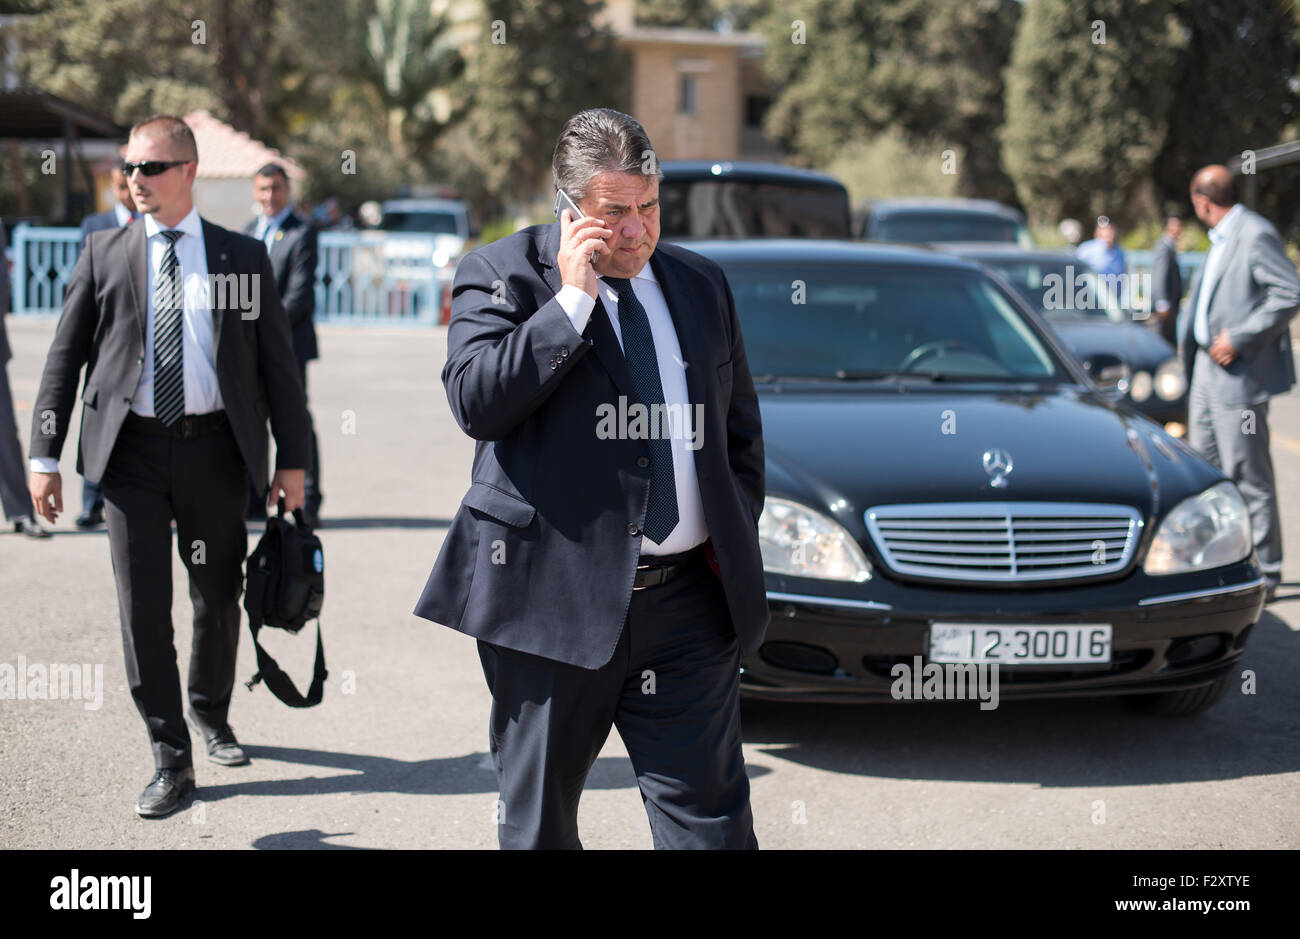 Amman, Jordan. 22nd Sep, 2015. German Economy Minister Sigmar Gabriel, surrounded by security staff, talks on his mobile phone before boarding a plane headed back to Berlin, Germany, at the airport in Amman, Jordan, 22 September 2015. Gabriel was briefed on the situation of the many migrants from Syria currently seeking refuge in Jordan during his two-day visit to the country. Photo: BERND VON JUTRCZENKA/dpa/Alamy Live News Stock Photo